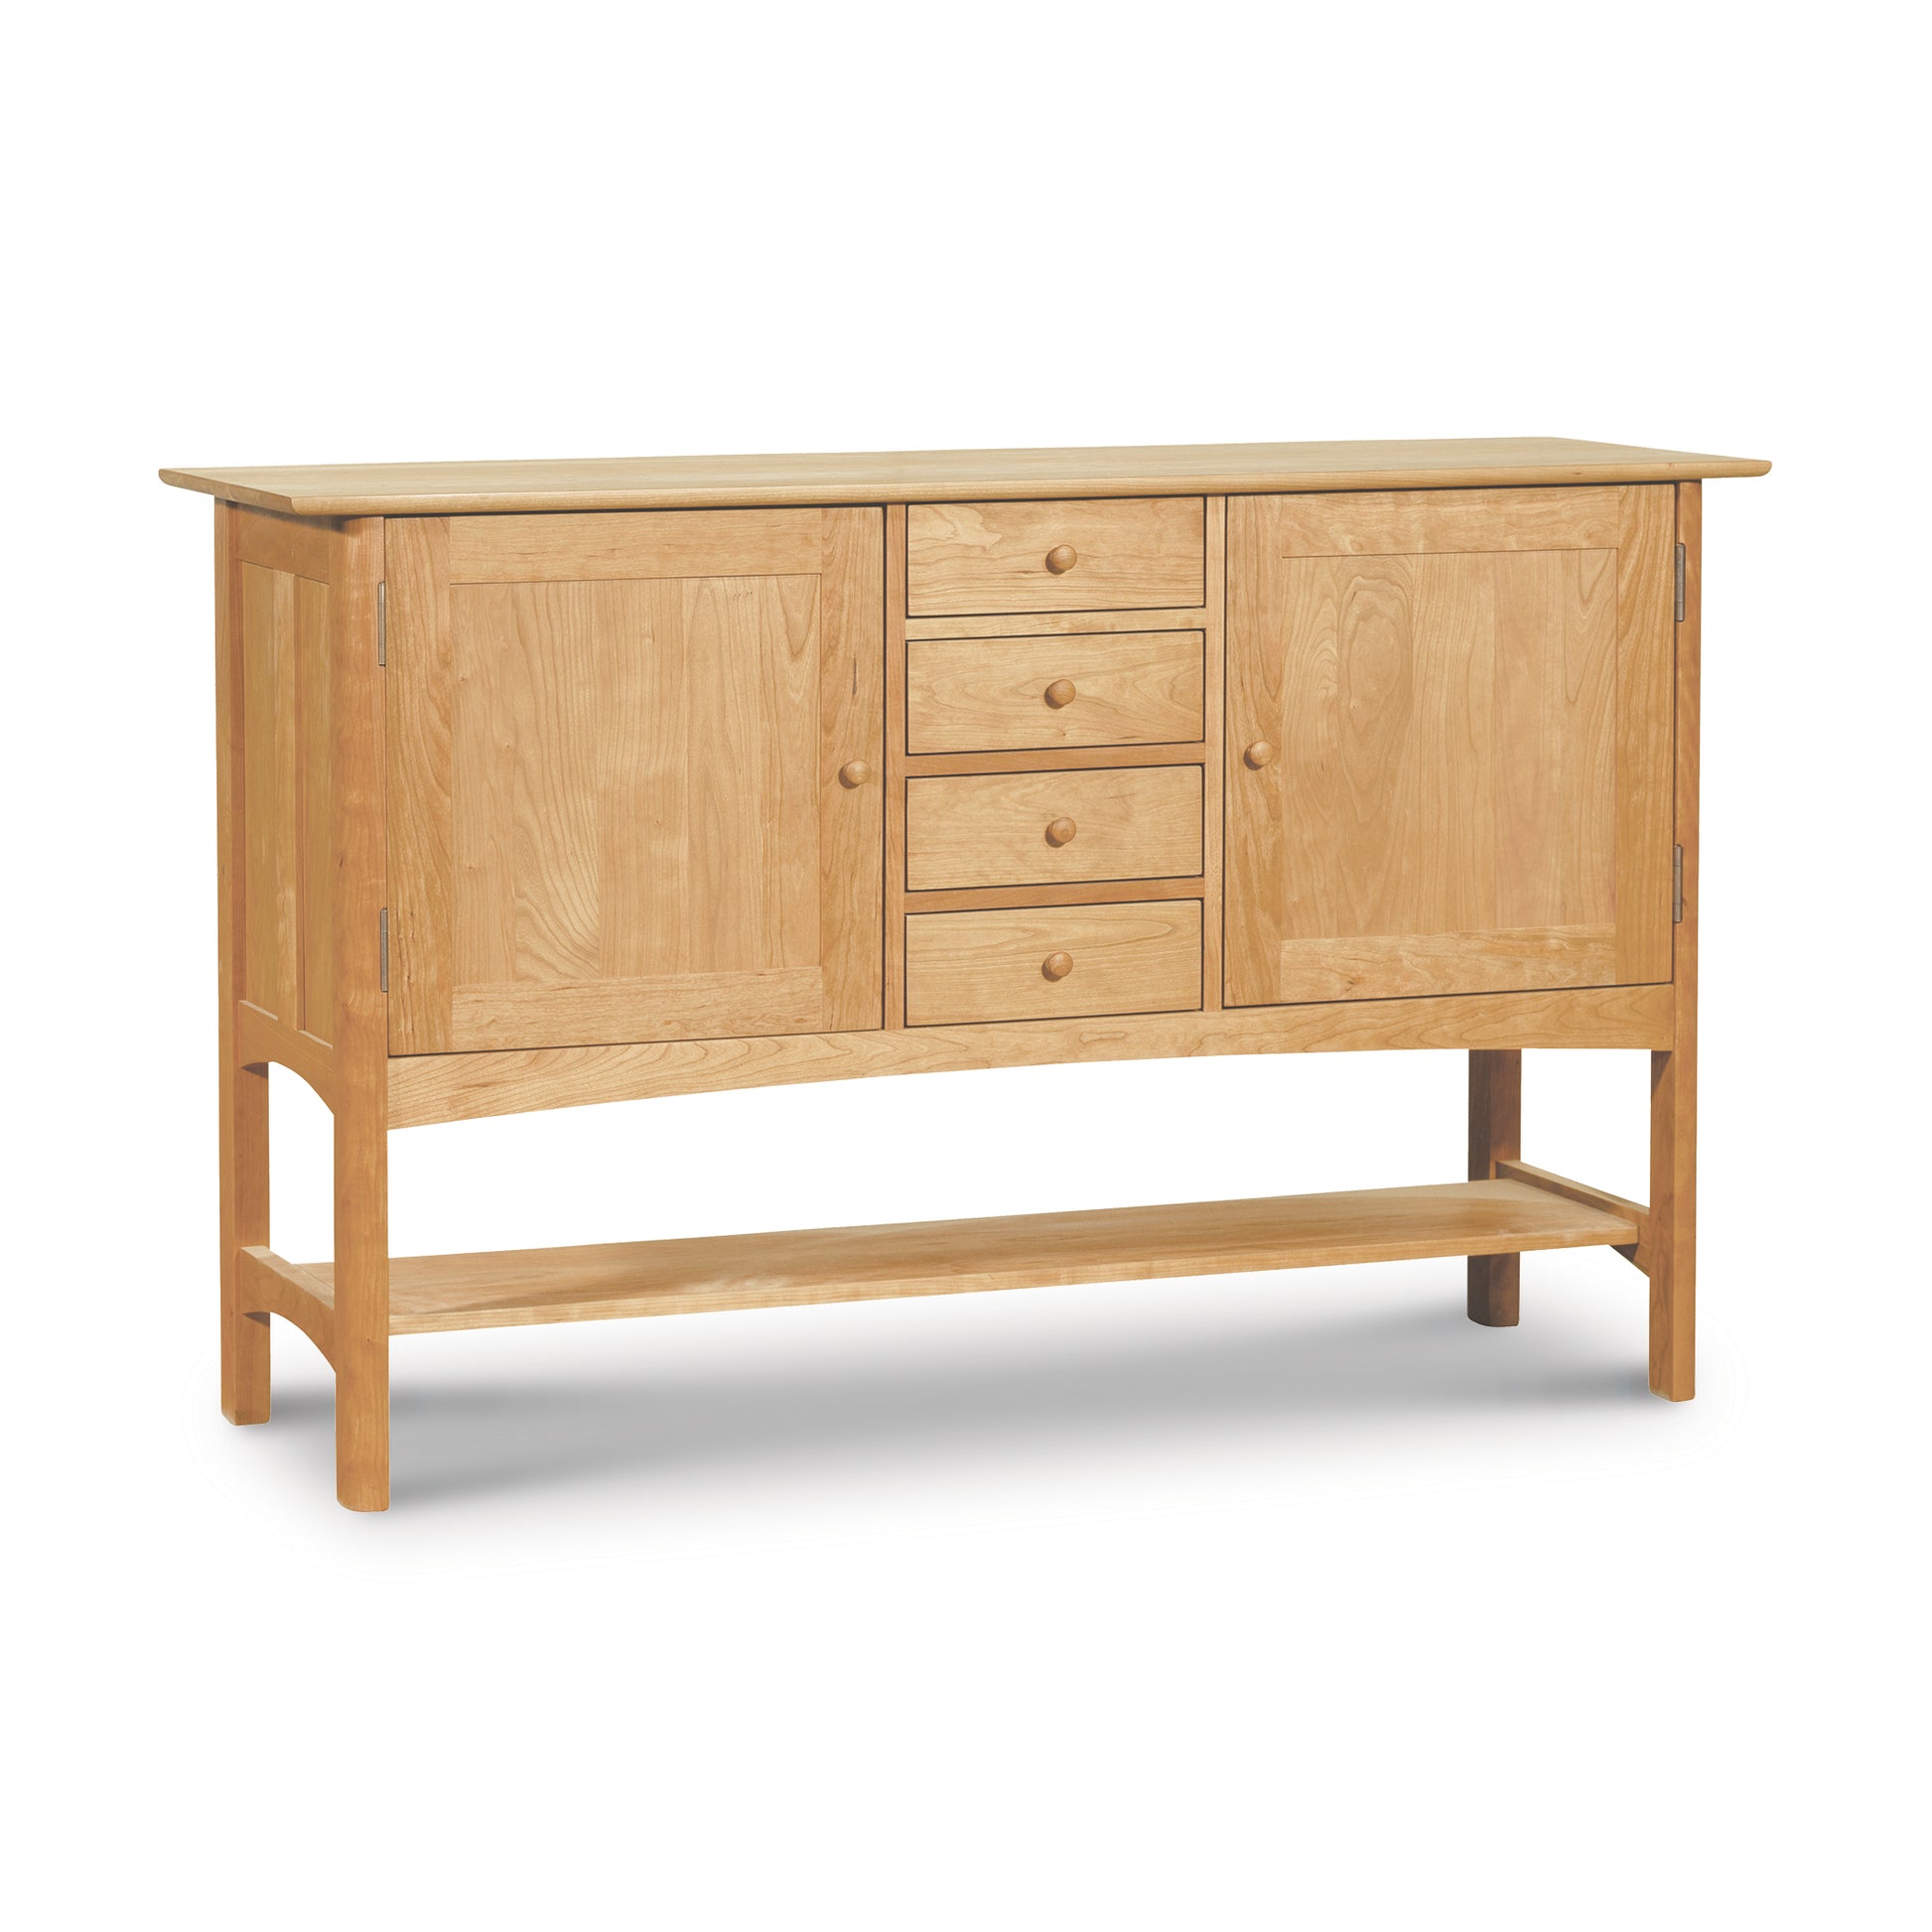 A solid wood Vermont Furniture Designs Heartwood Shaker Huntboard with two cabinet doors and five drawers, set against a white background.